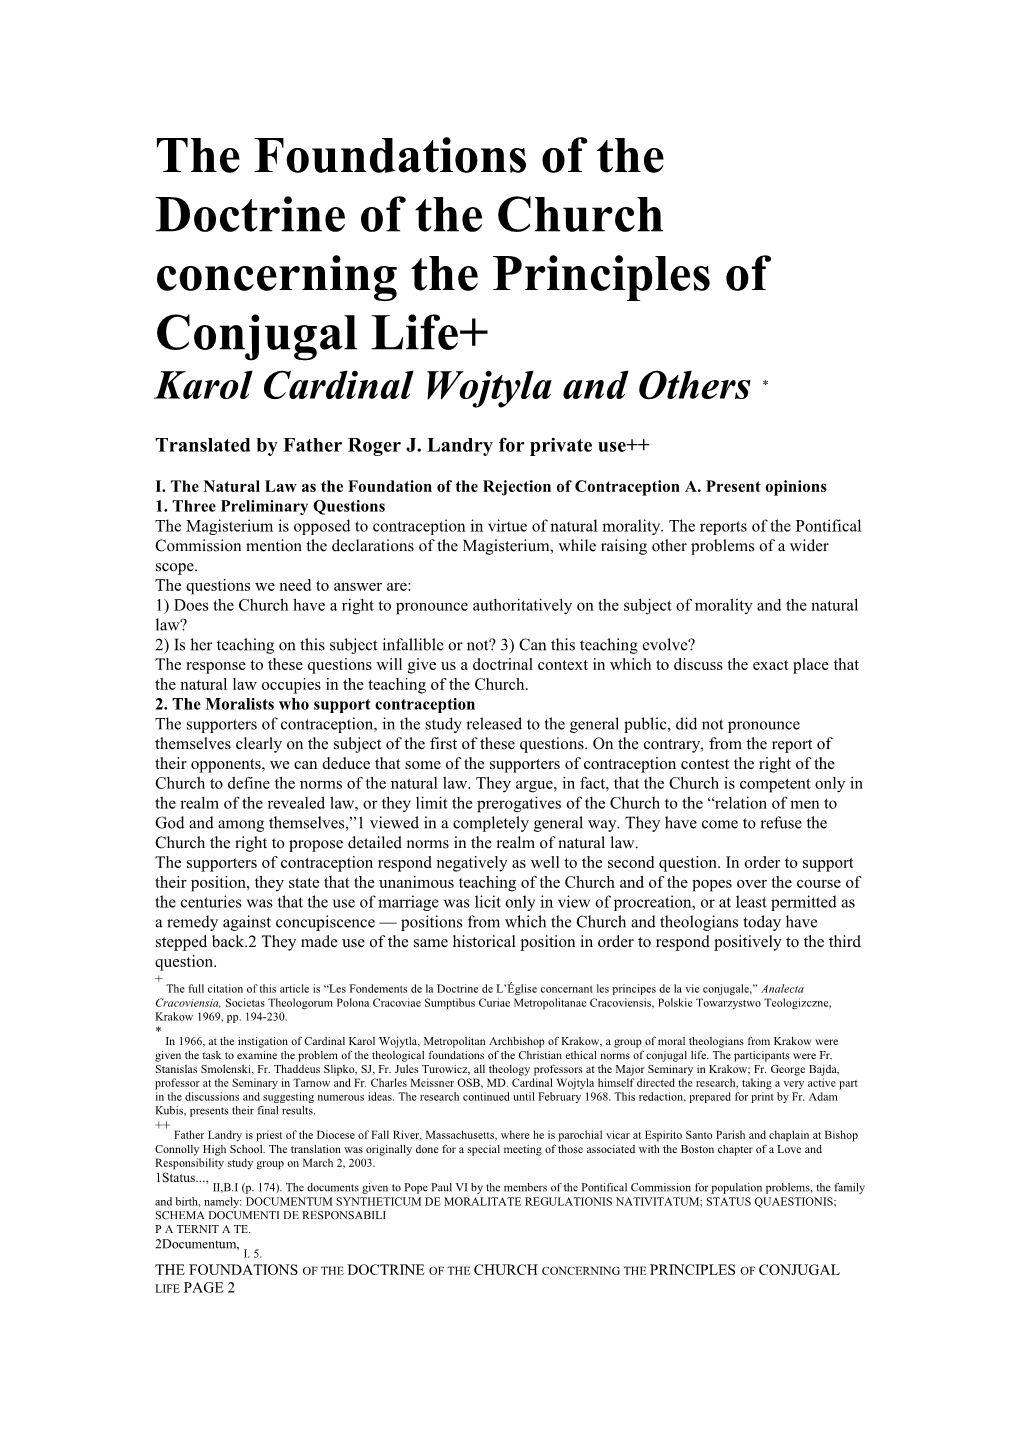 The Foundations of the Doctrine of the Church Concerning the Principles of Conjugal Life+